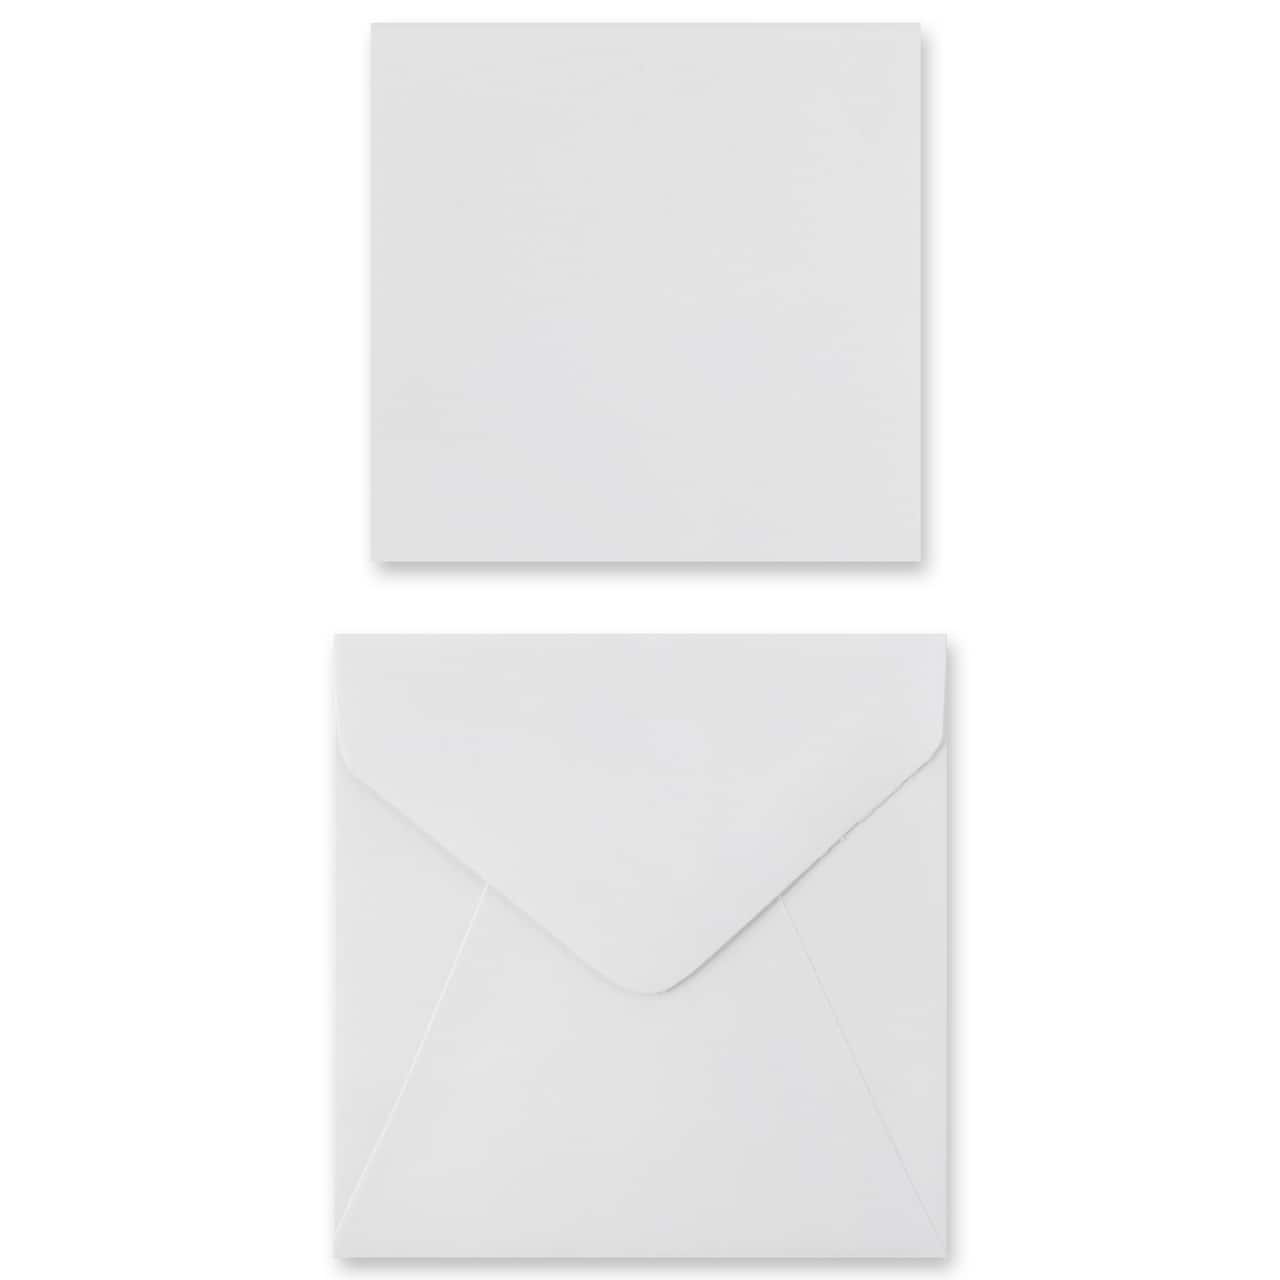 3&#x22; x 3&#x22; Card &#x26; Envelope 10 Pack by Recollections&#x2122;